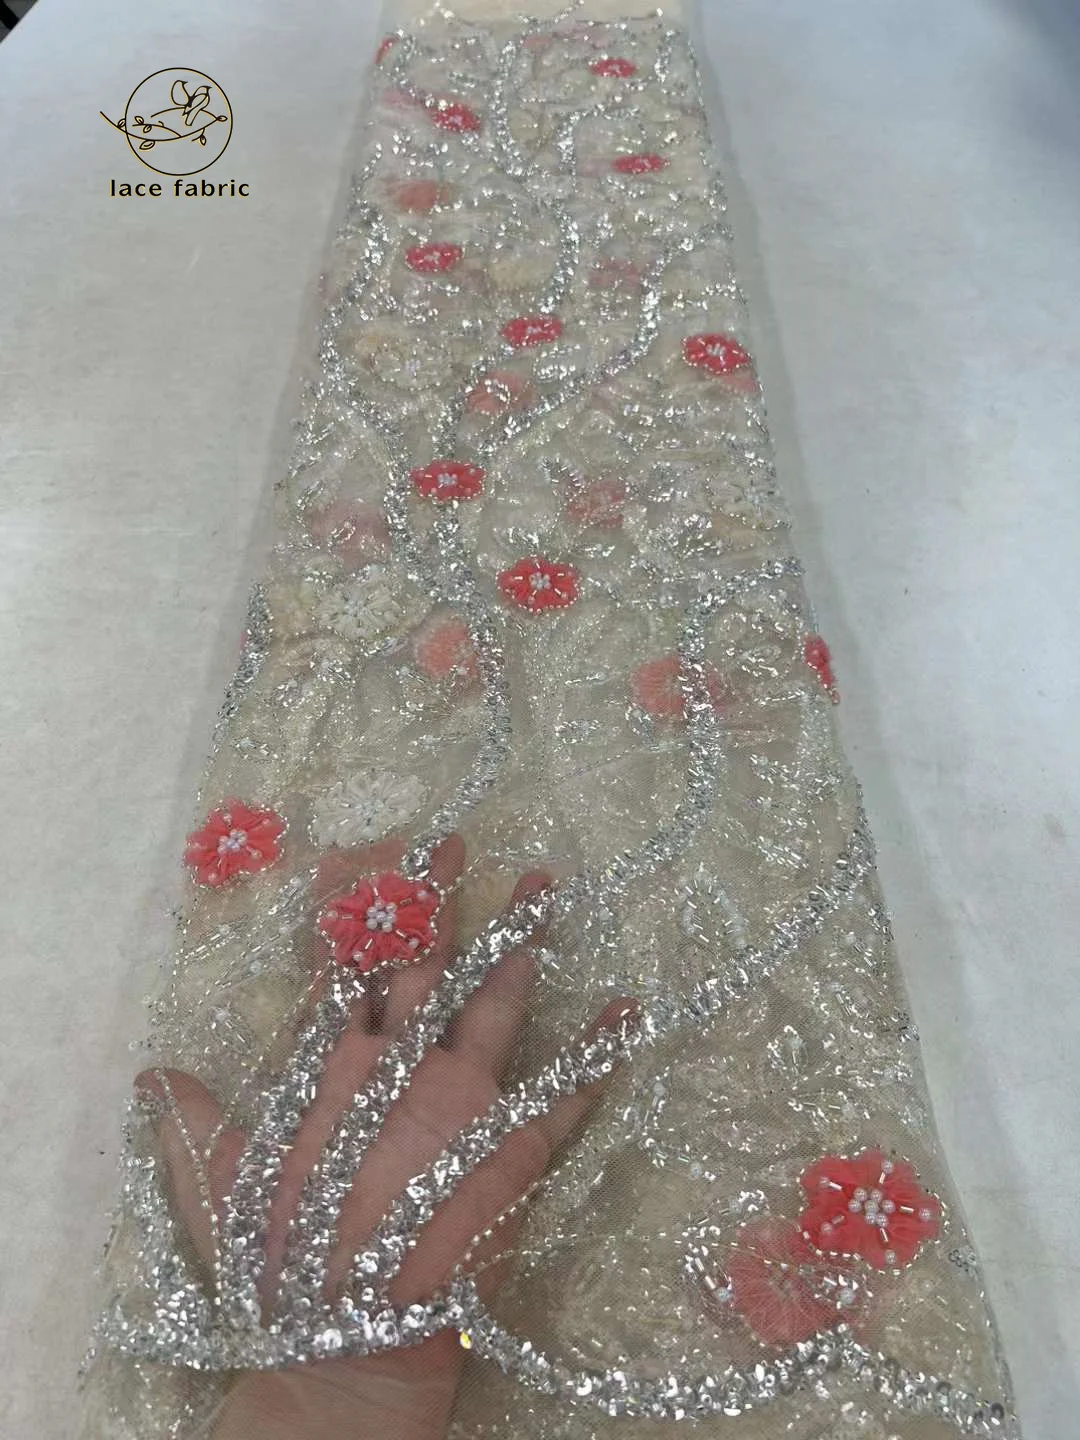 Latest African Groom 3D Flower Lace Fabric Embroiderey Sequins Beads French Tulle Lace Fabric For Nigeria Wedding Party Dress the latest red 3d african lace fabric guipure lace of nigeria queen lace of china wind bride s wedding dress in 2019 dy wxb3